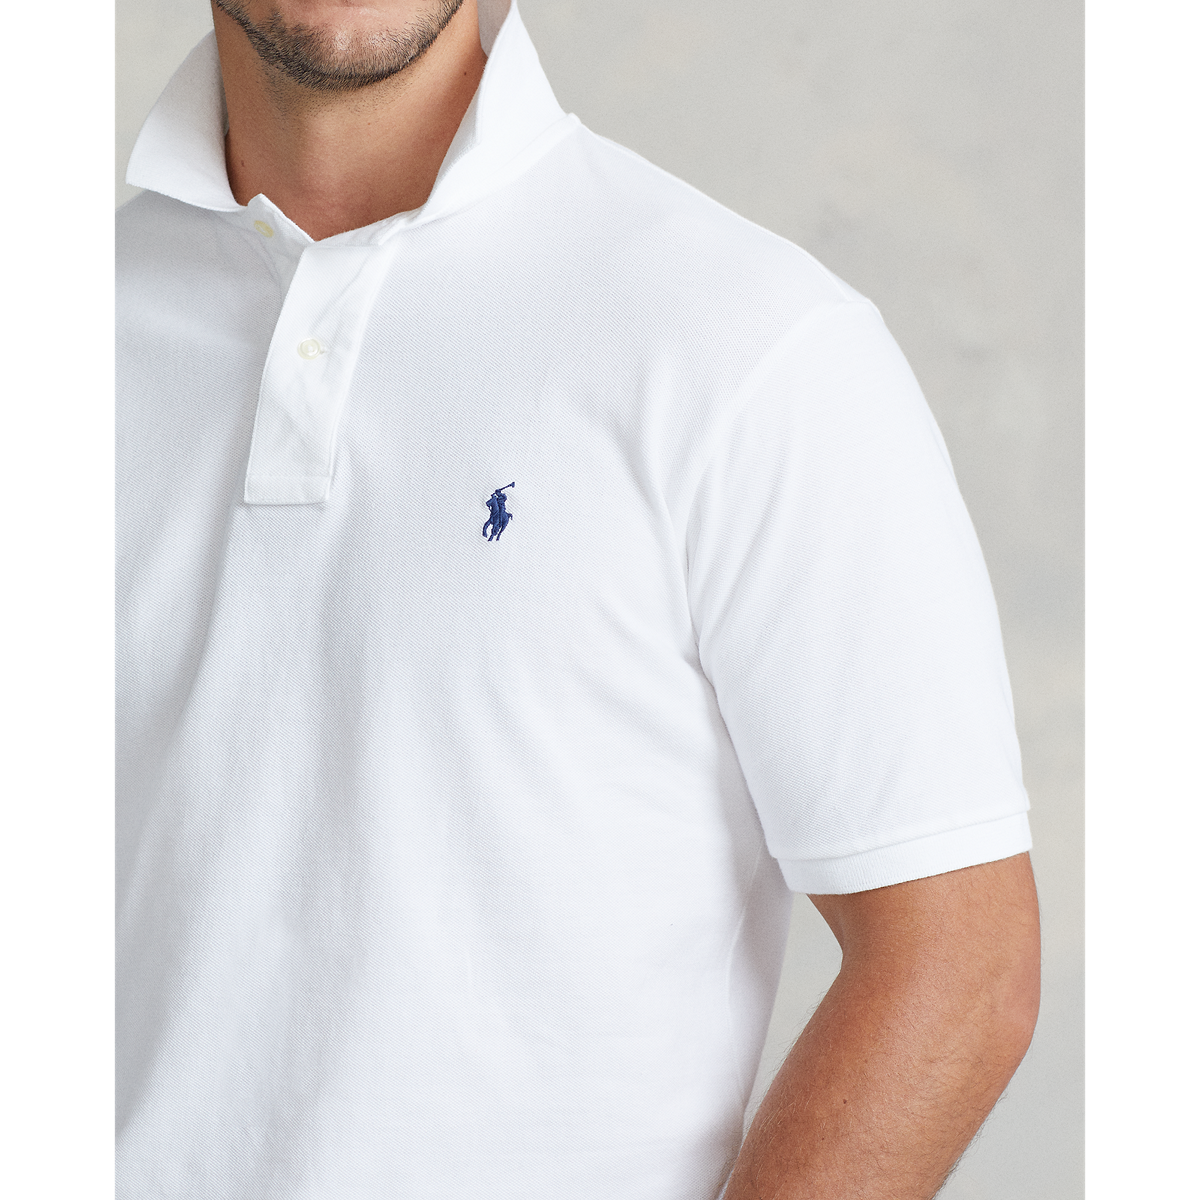 Polo Ralph Lauren Big & Tall Classic Fit Solid Cotton Mesh Polo